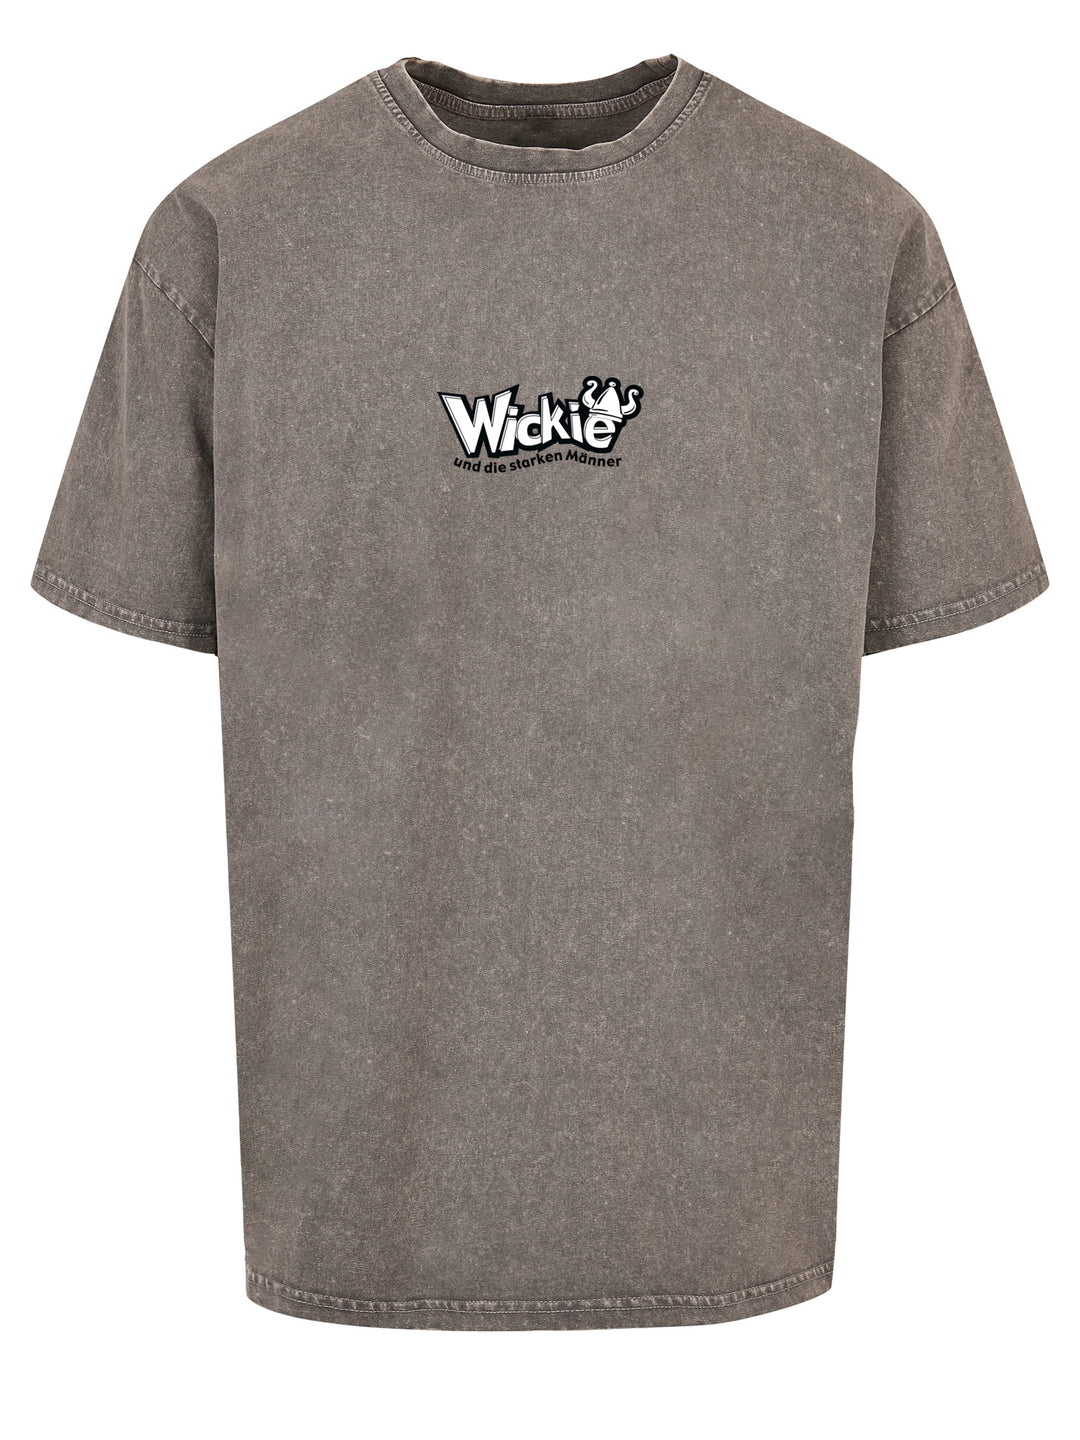 Wickie Into The Unknown | Heroes of Childhood | Acid Washed Heavy Oversize Boys Tee